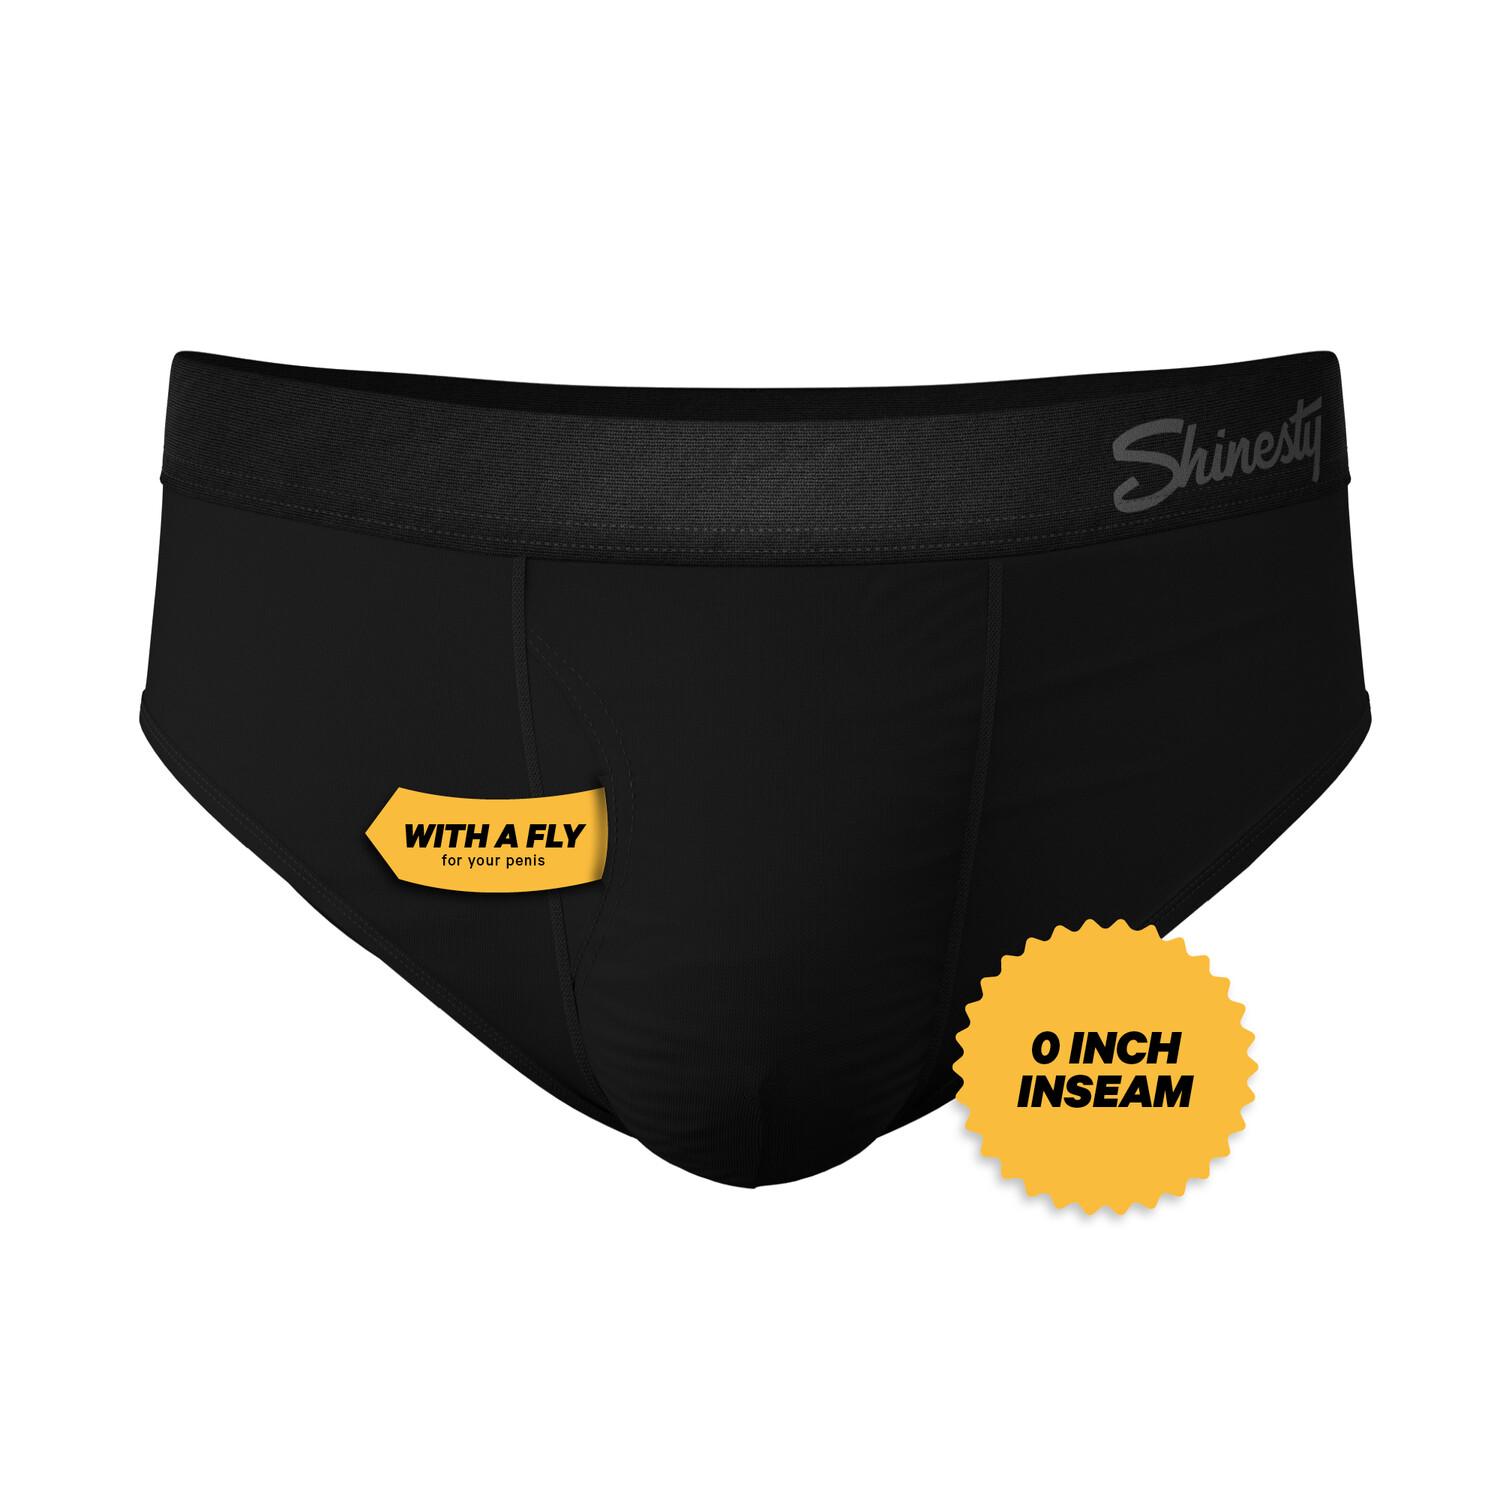 Shinesty® The Tool Kit Stretch Boxer Briefs - Men's Boxers in Black